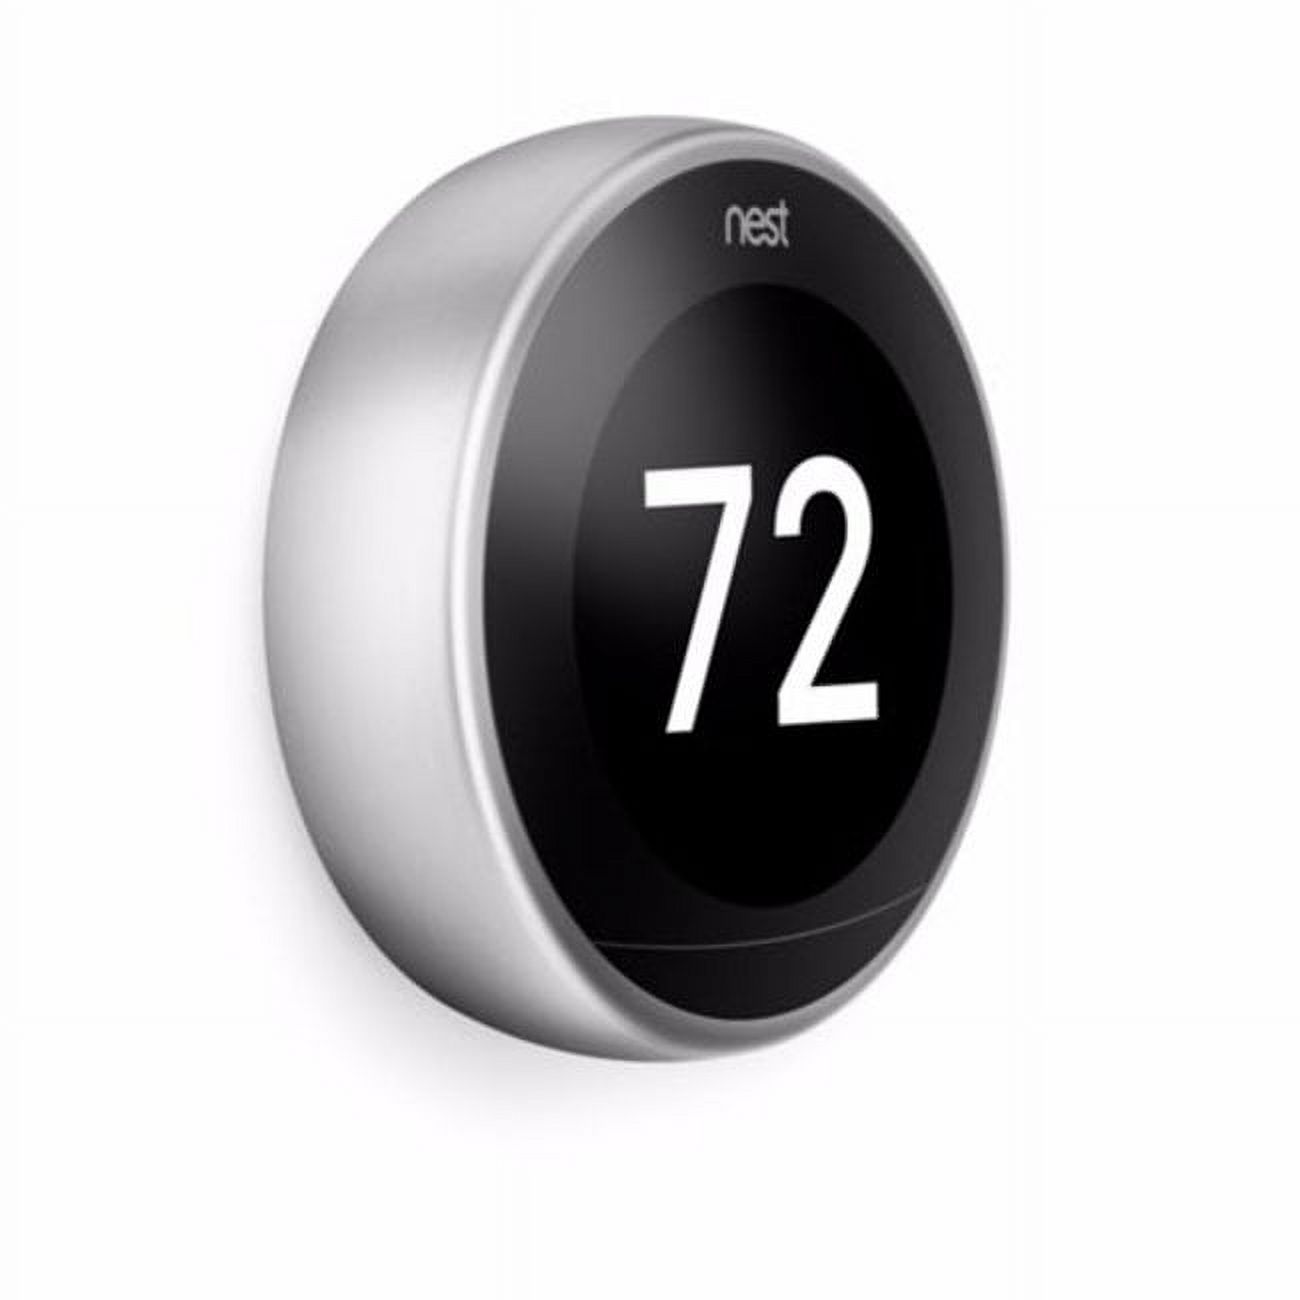 Google Nest 3rd Gen. Thermostat (Stainless Steel) - image 4 of 4